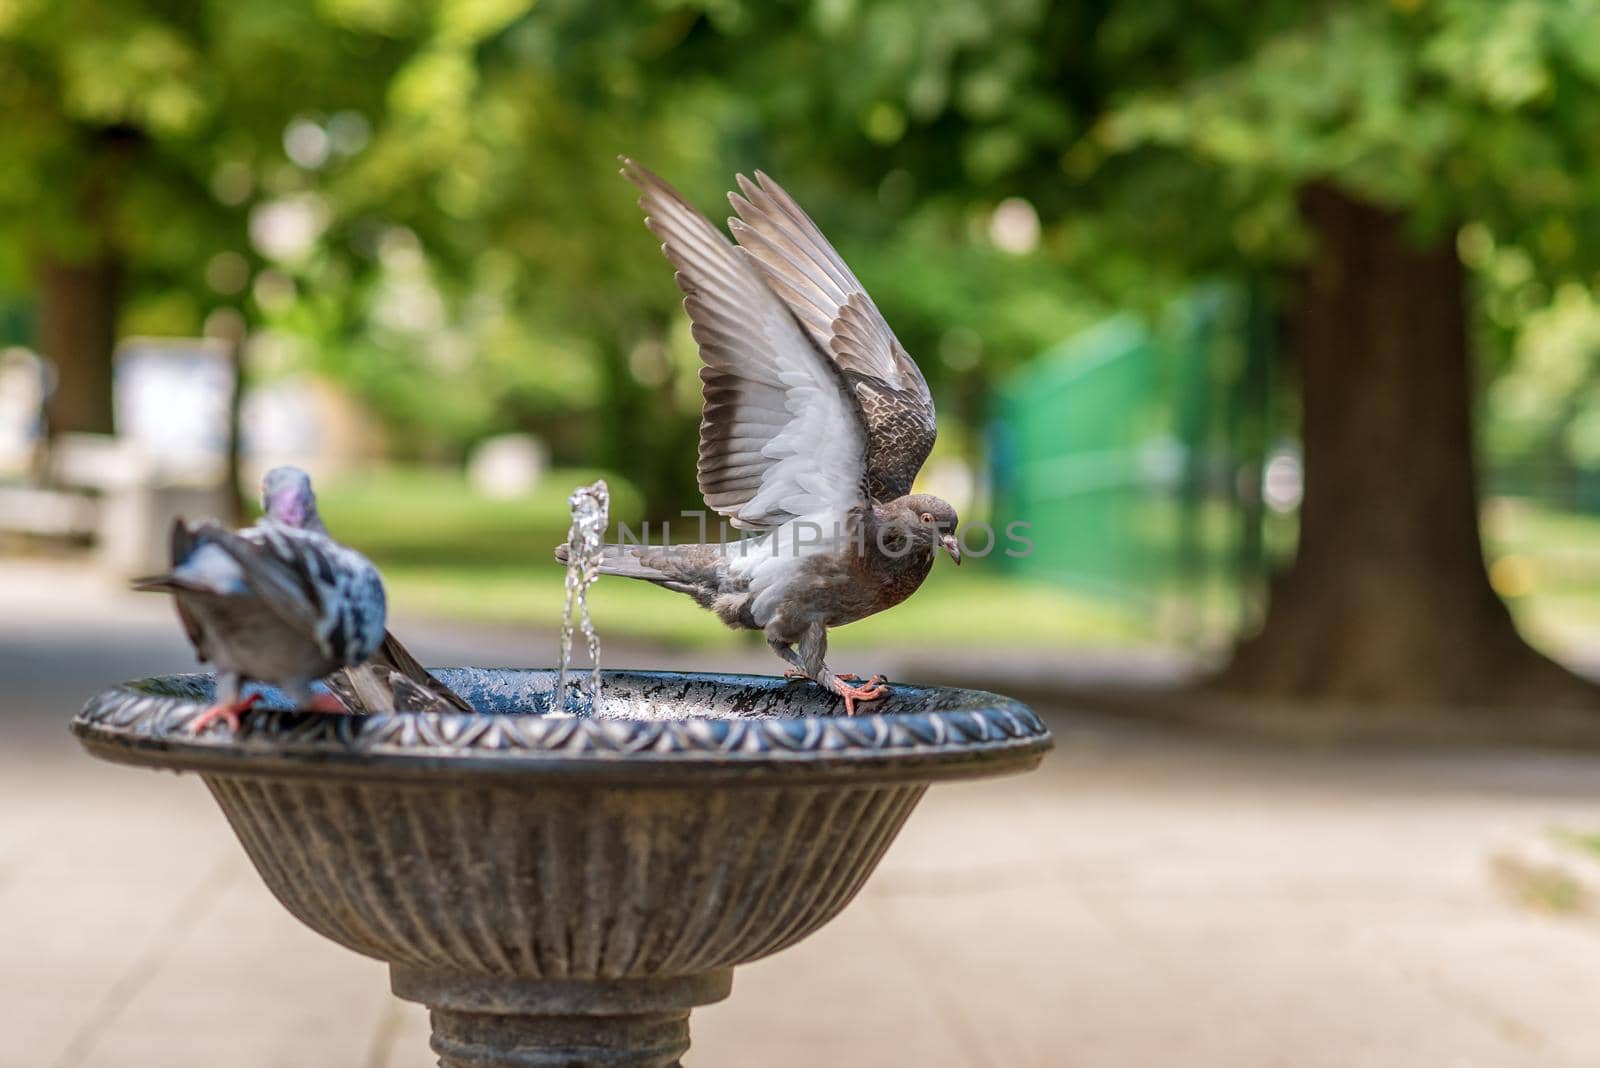 Pigeons drinking and bathing in a bird fountain in a park in summer